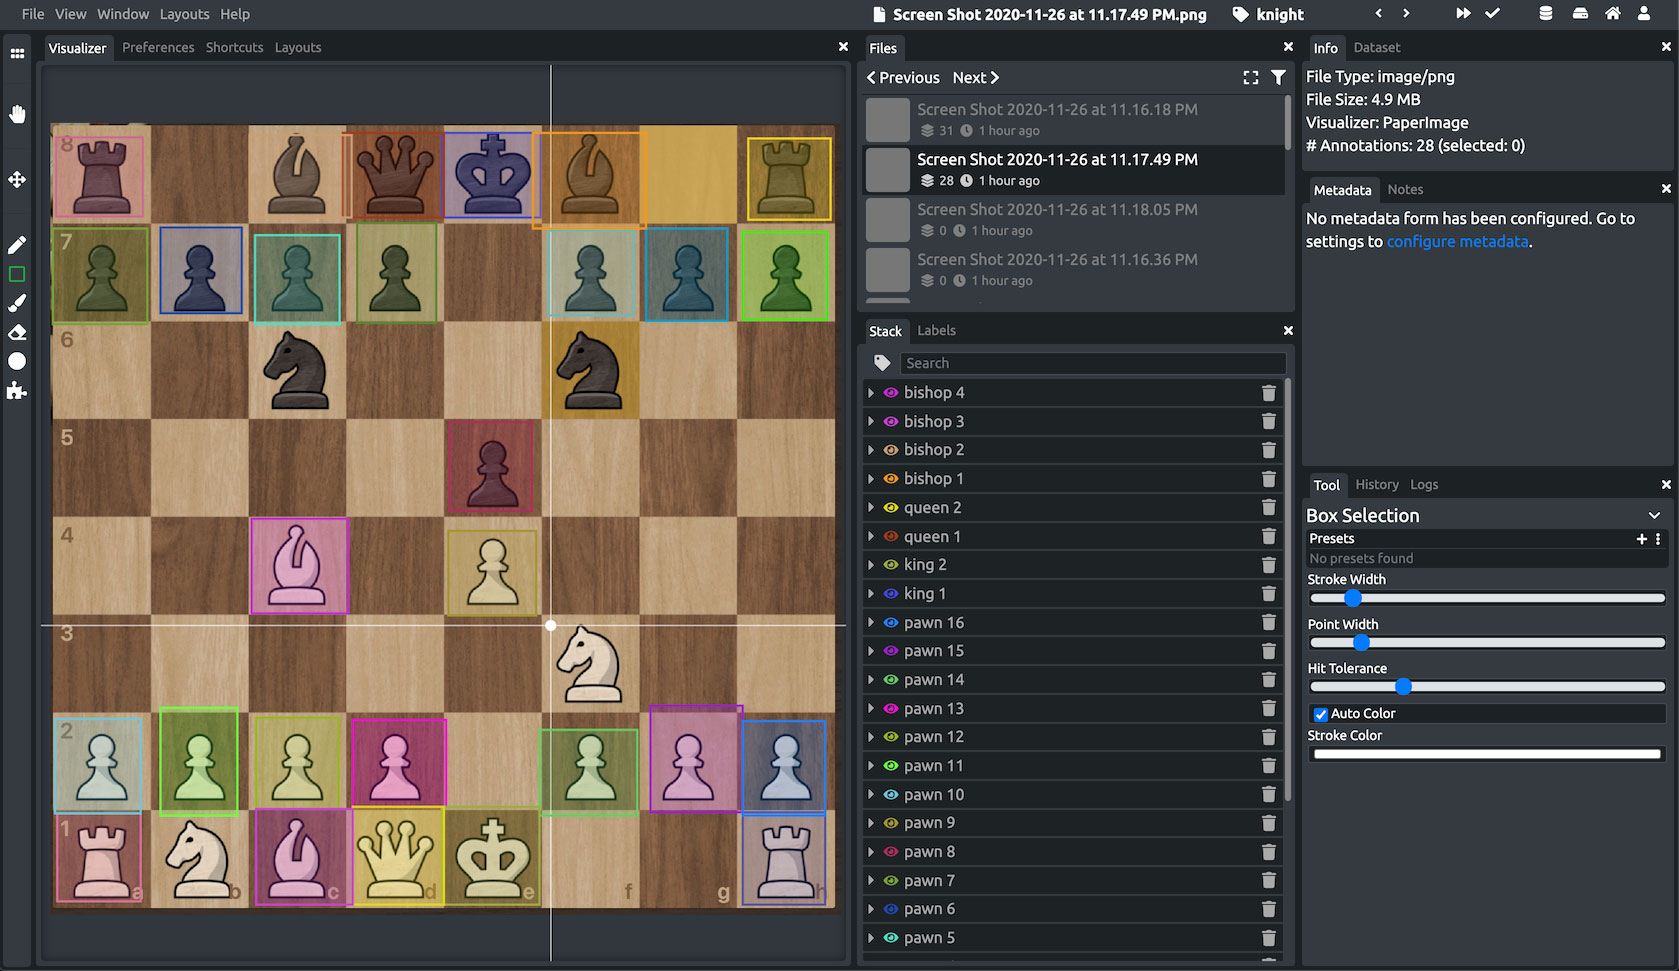 DataTorch annotator, annotating a chess board with an annotation for each chess piece.